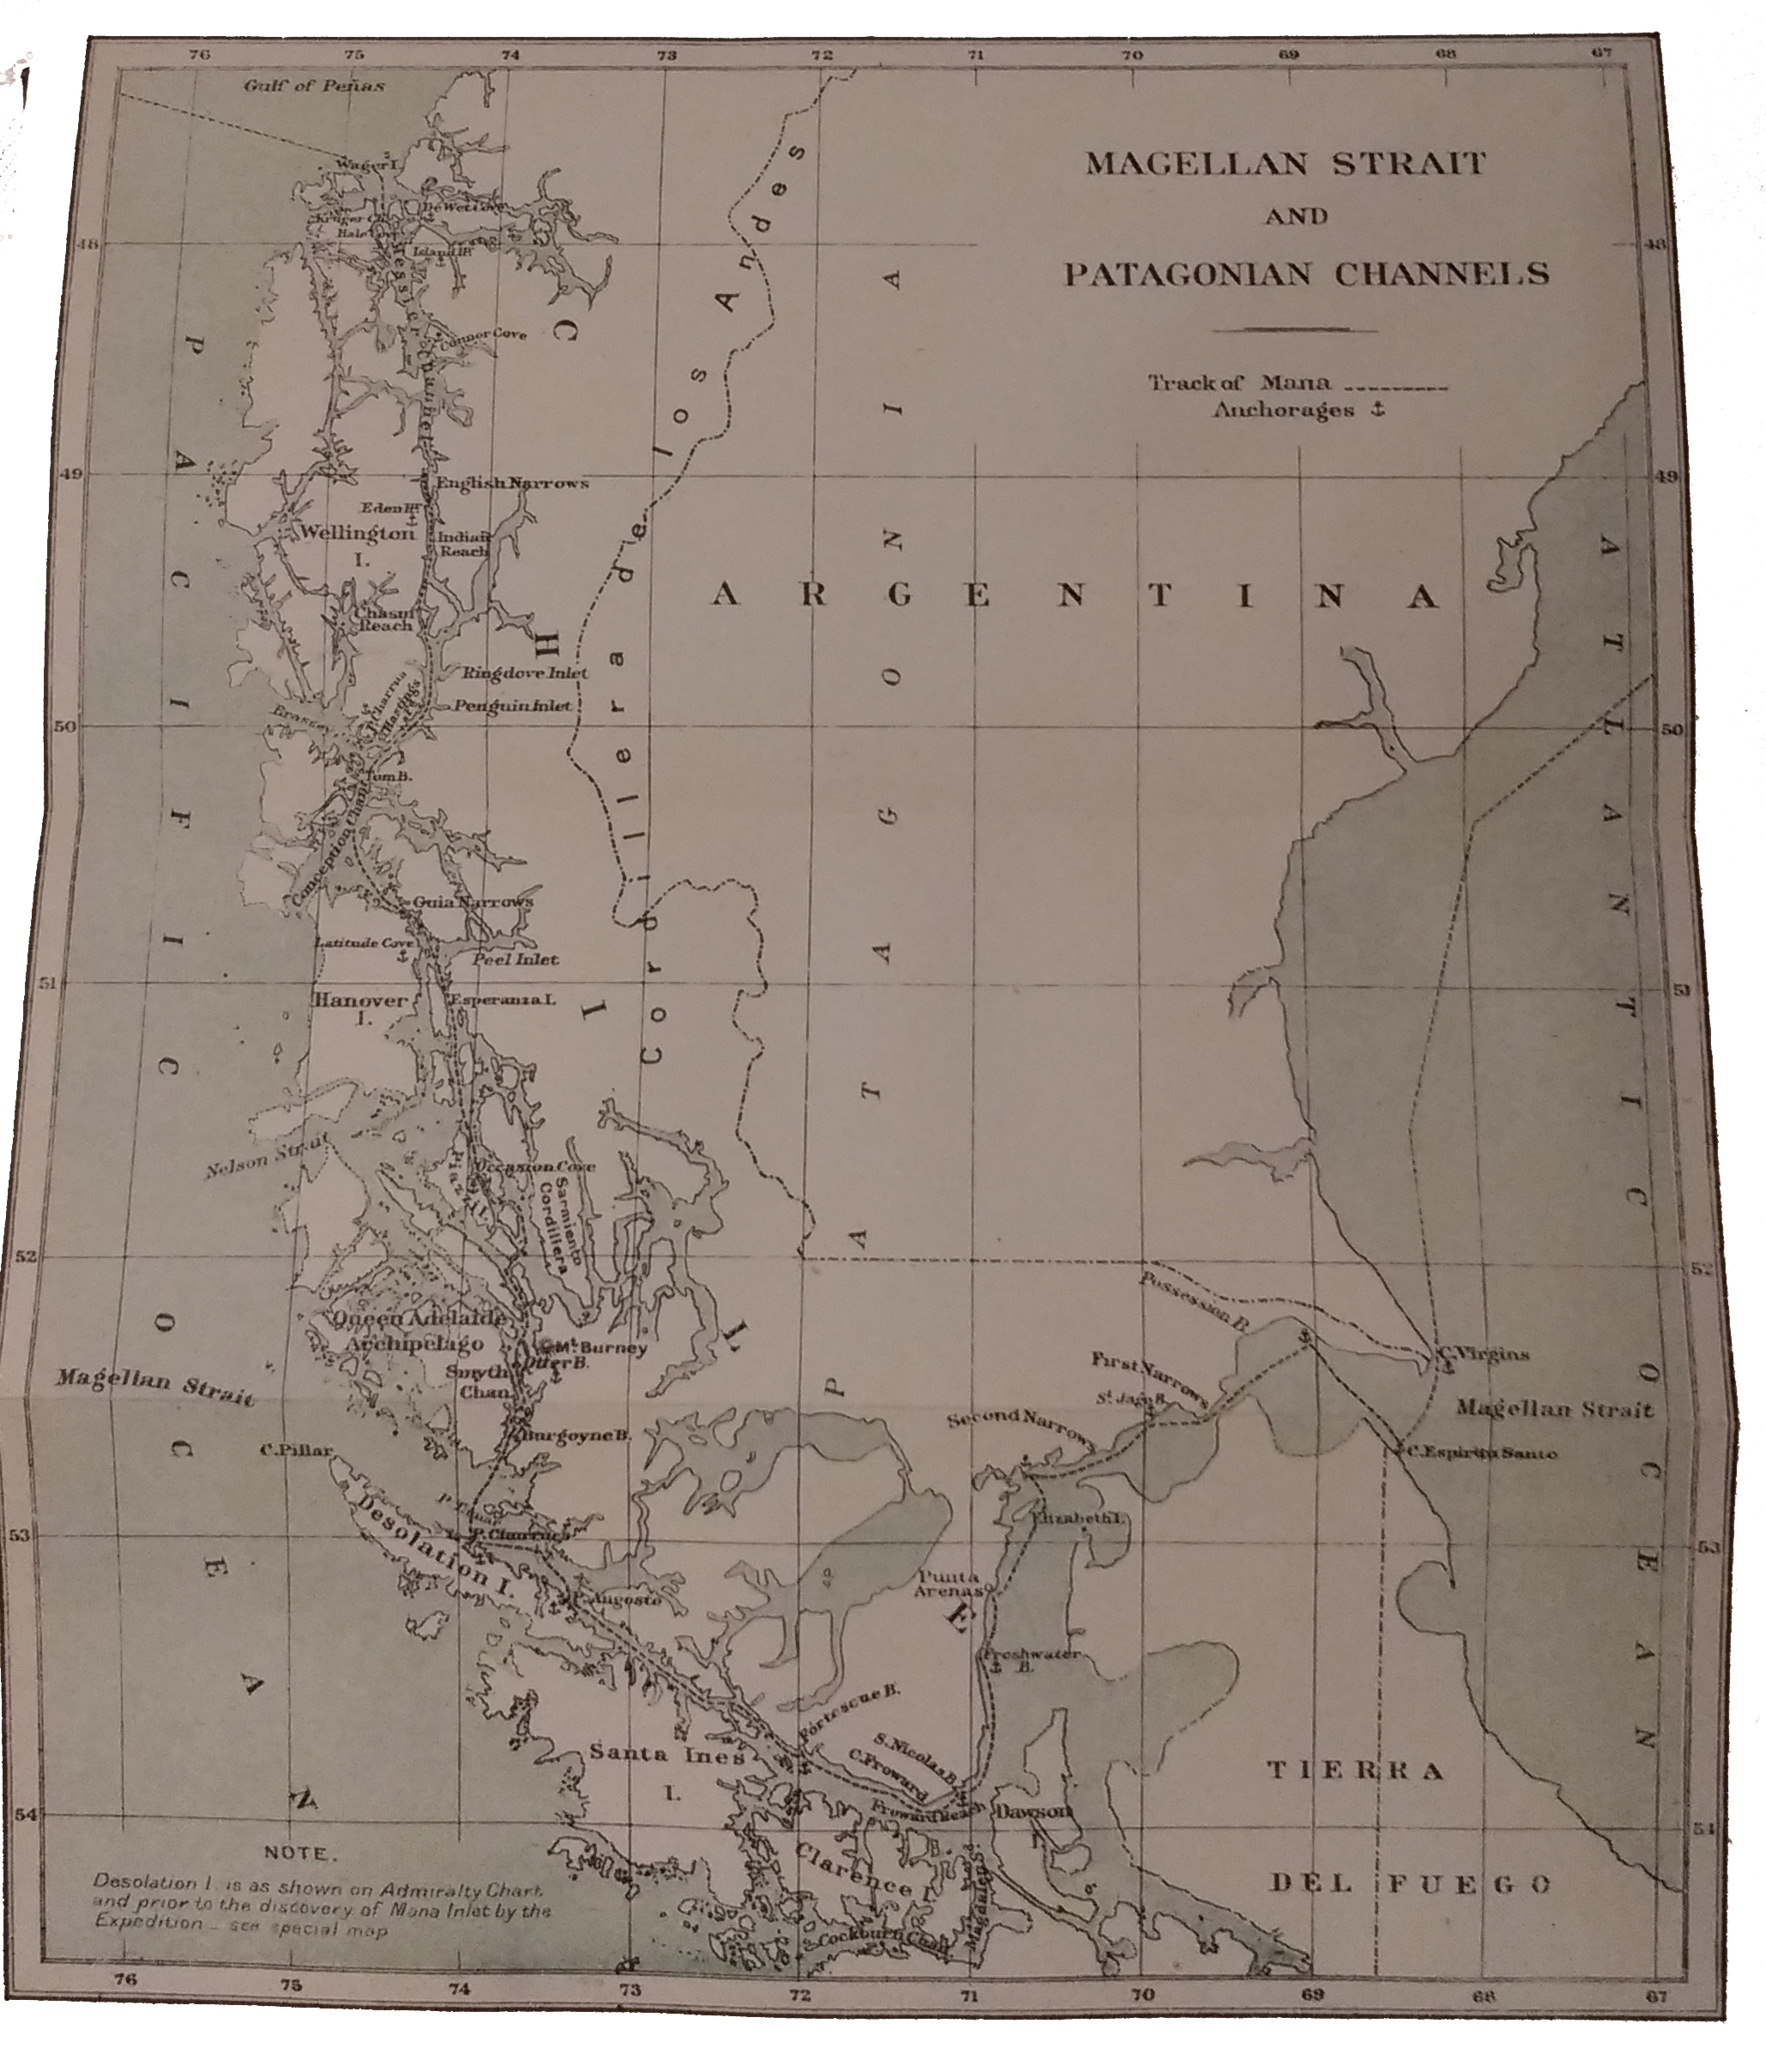 map of Magellan Straits and Patagonian Channels through southern tip of South America